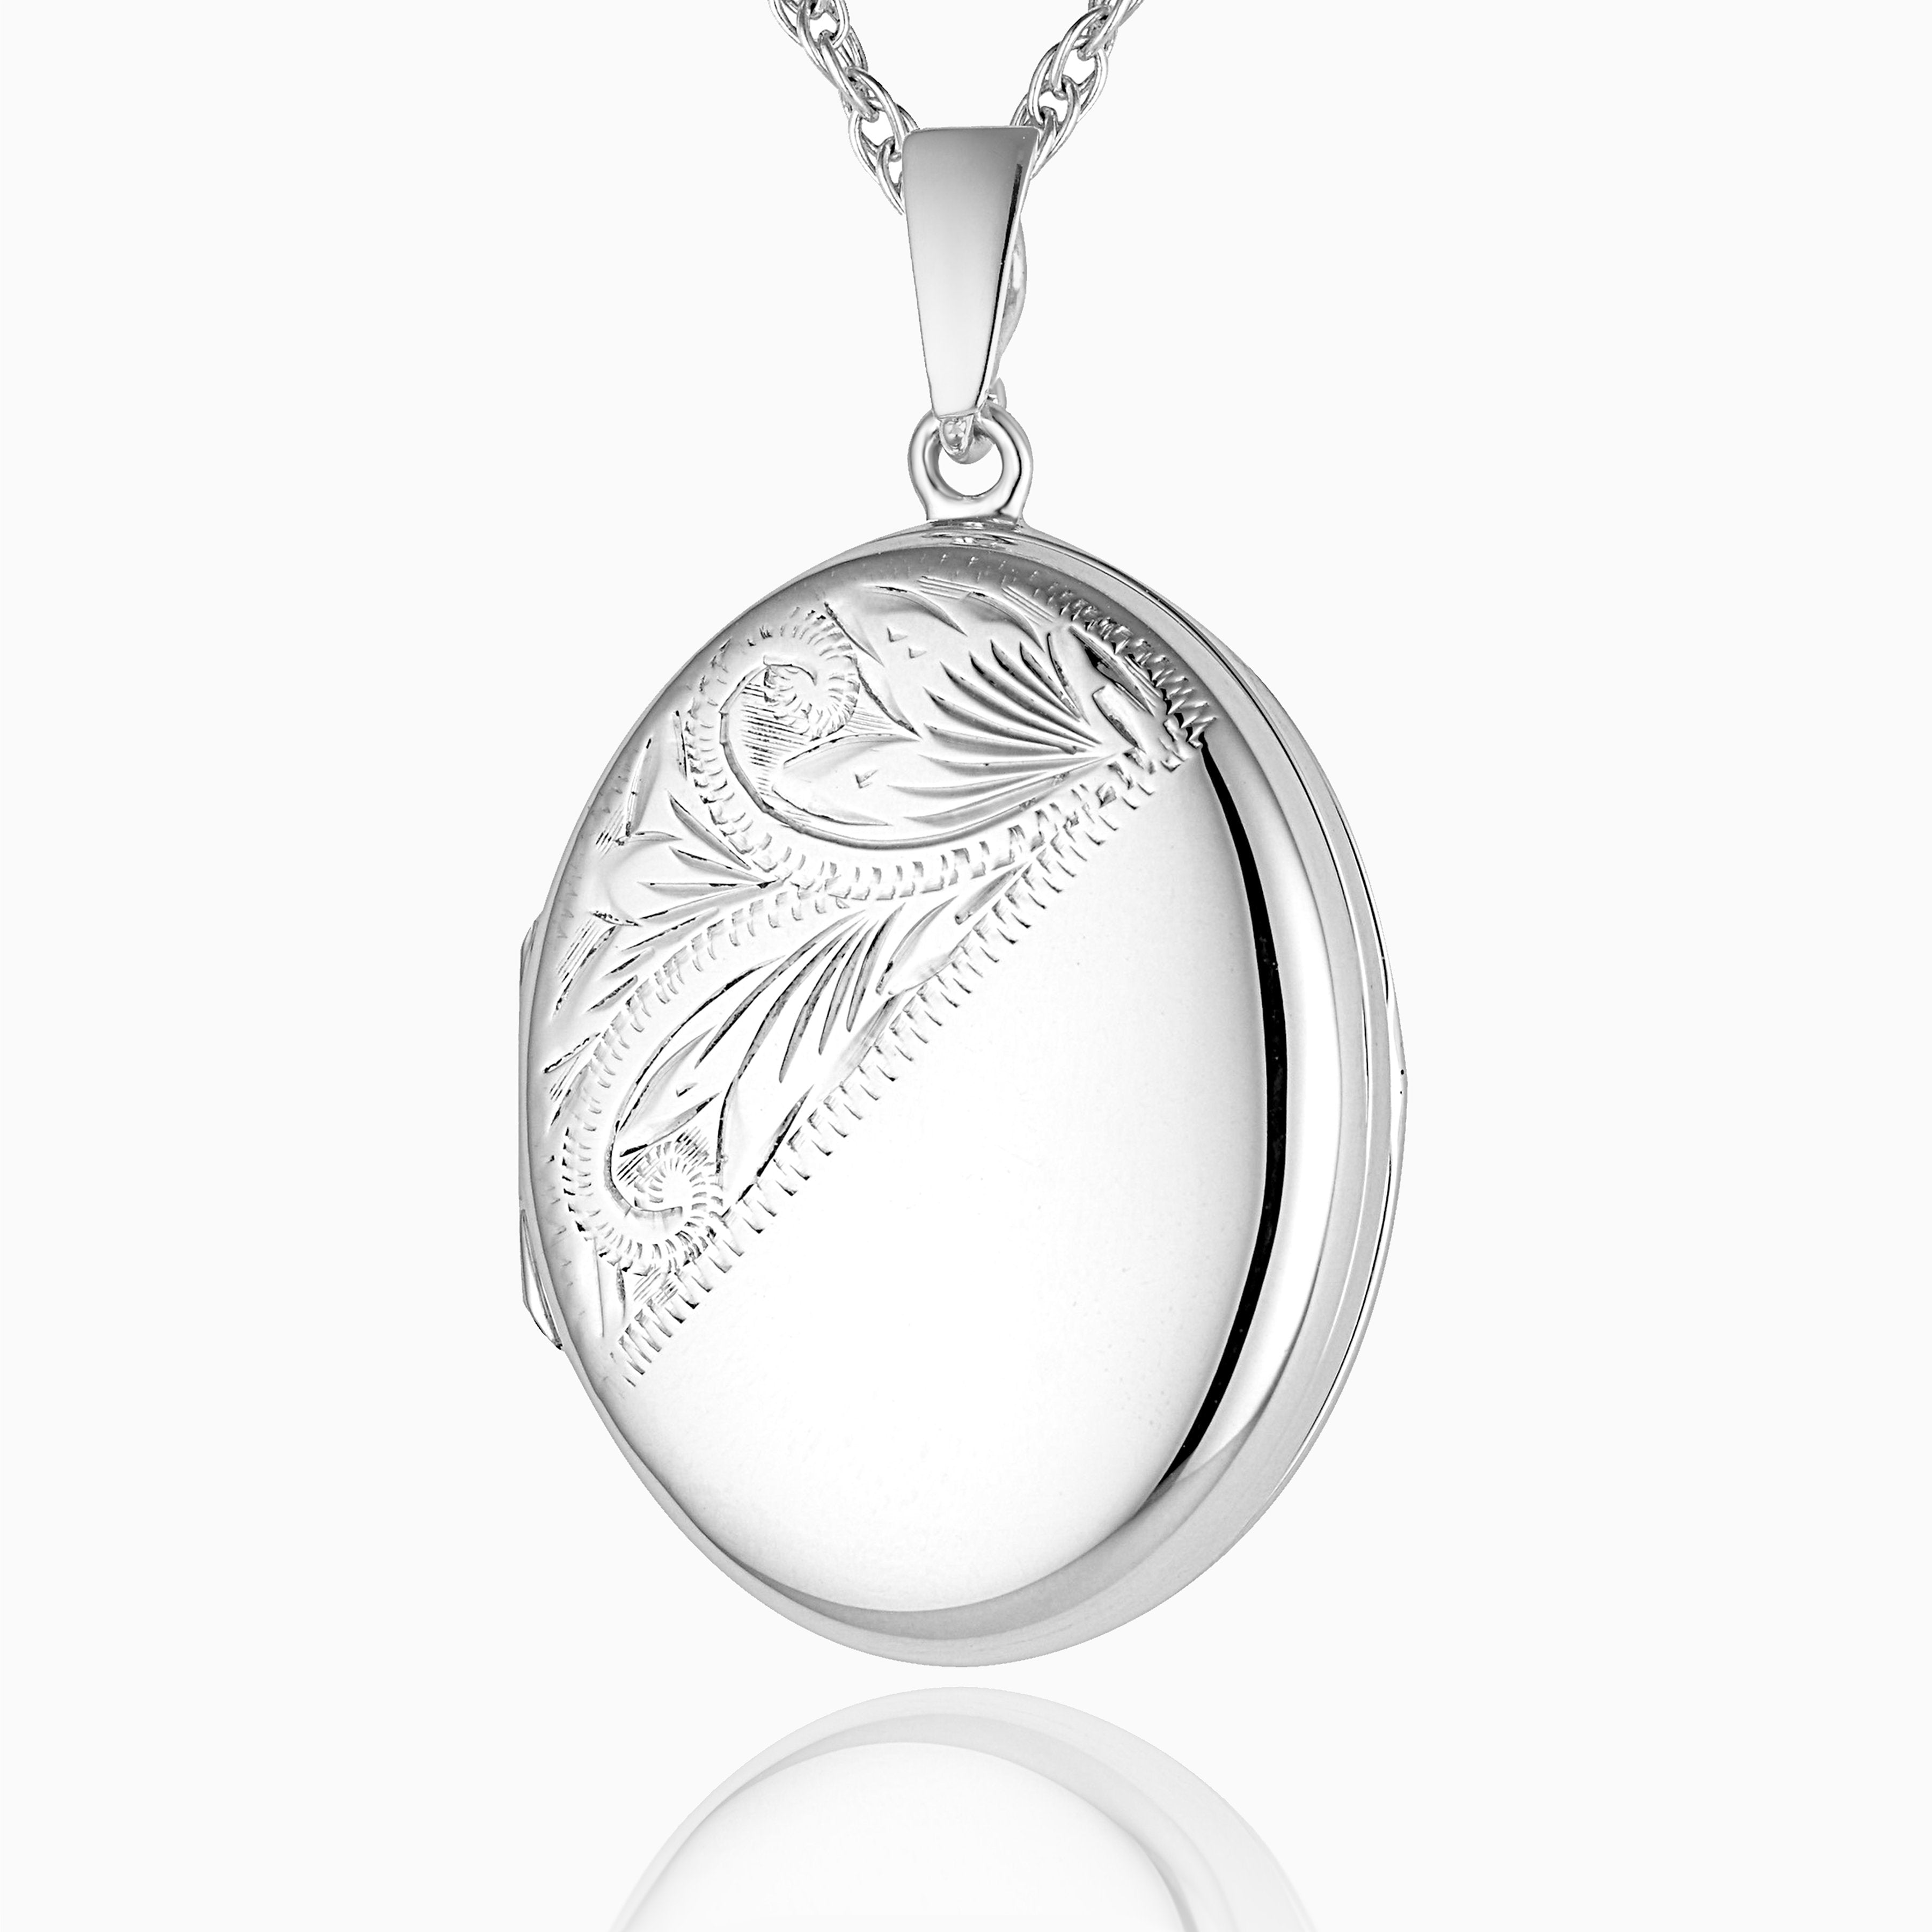 sterling silver oval locket with an engraved foliate design across the left diagonal 